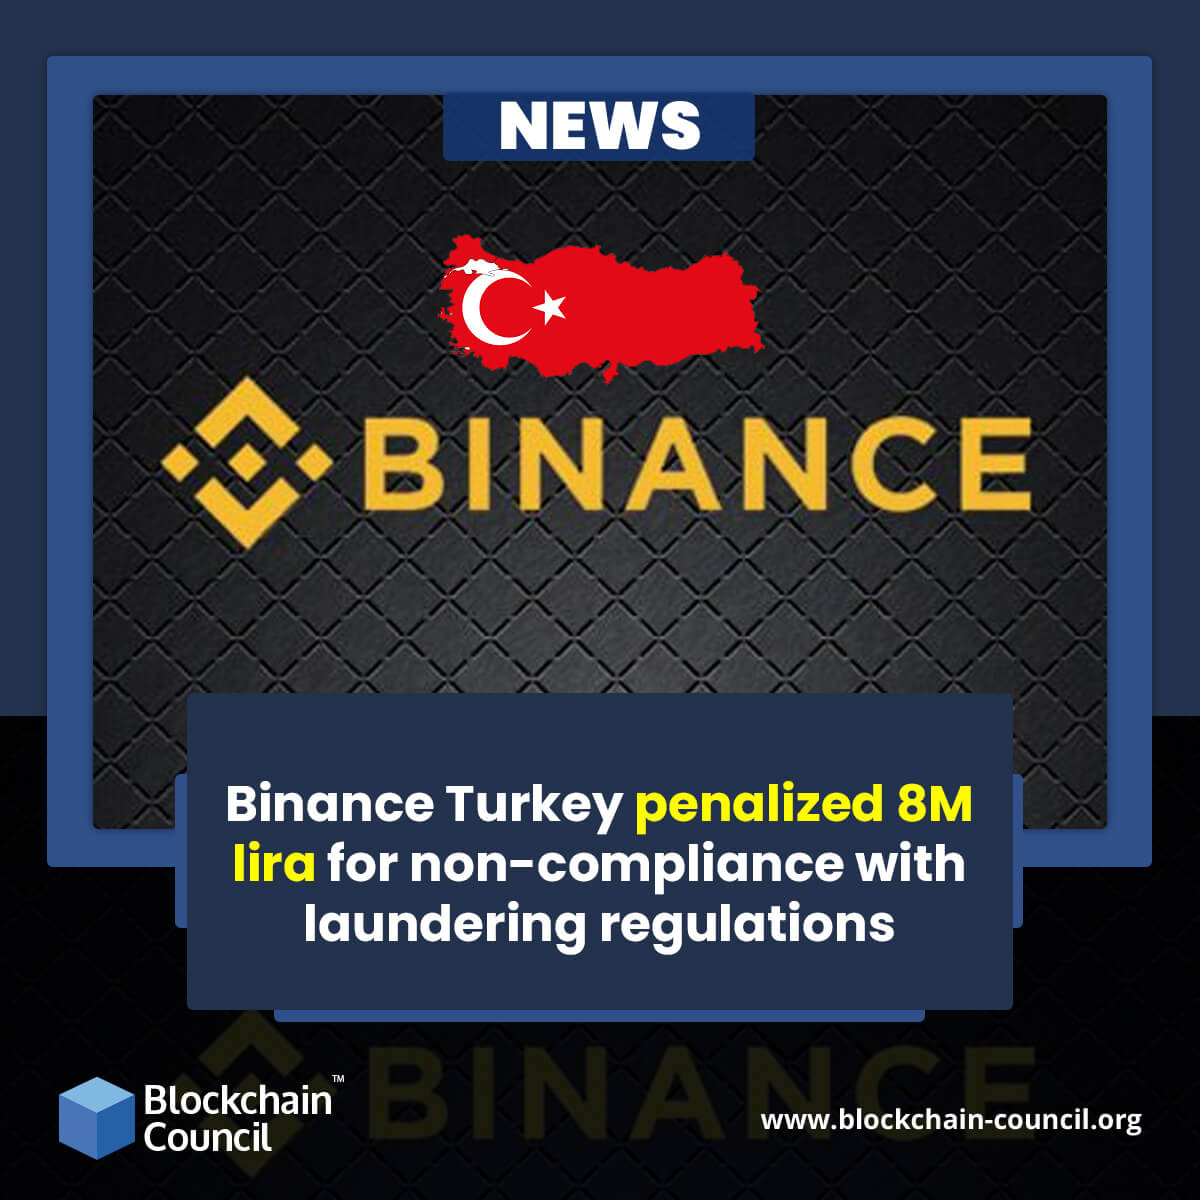 Binance Turkey penalized 8M lira for non-compliance with laundering regulations